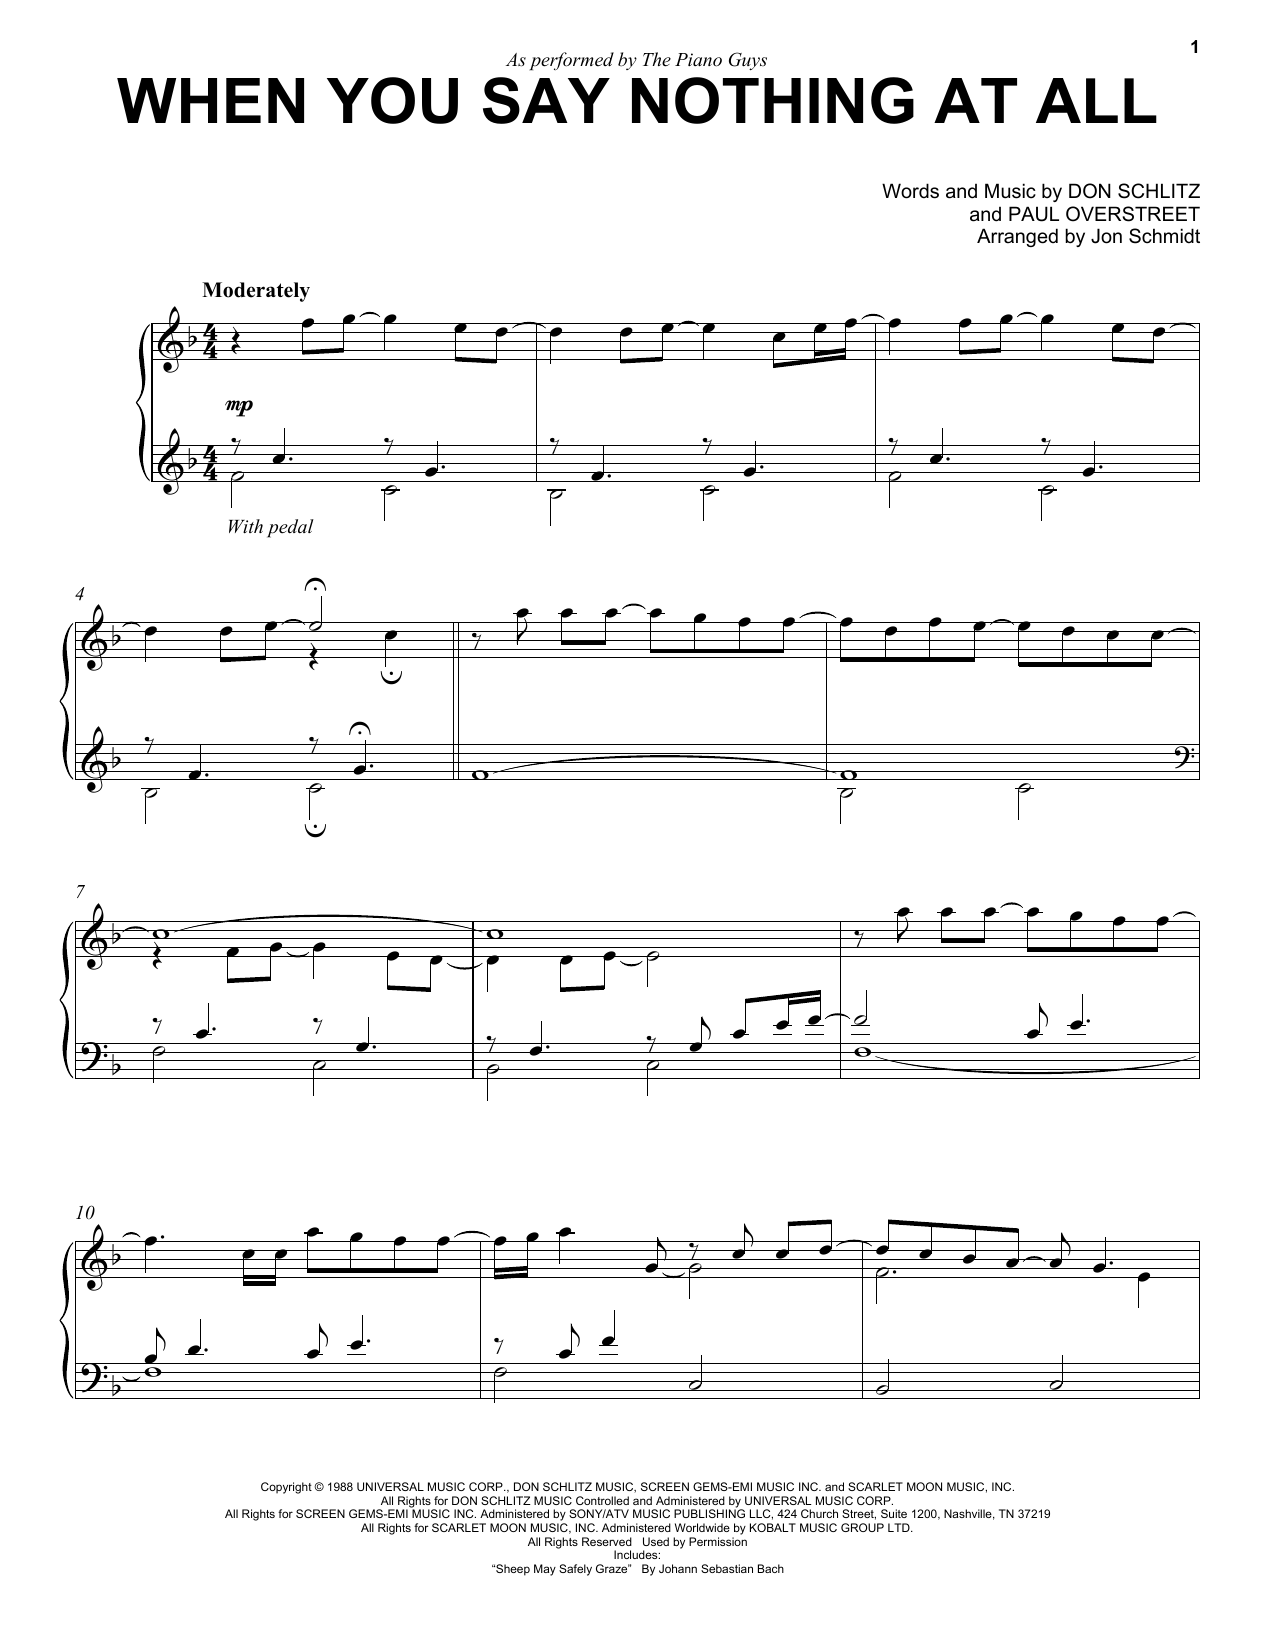 Download The Piano Guys When You Say Nothing At All Sheet Music